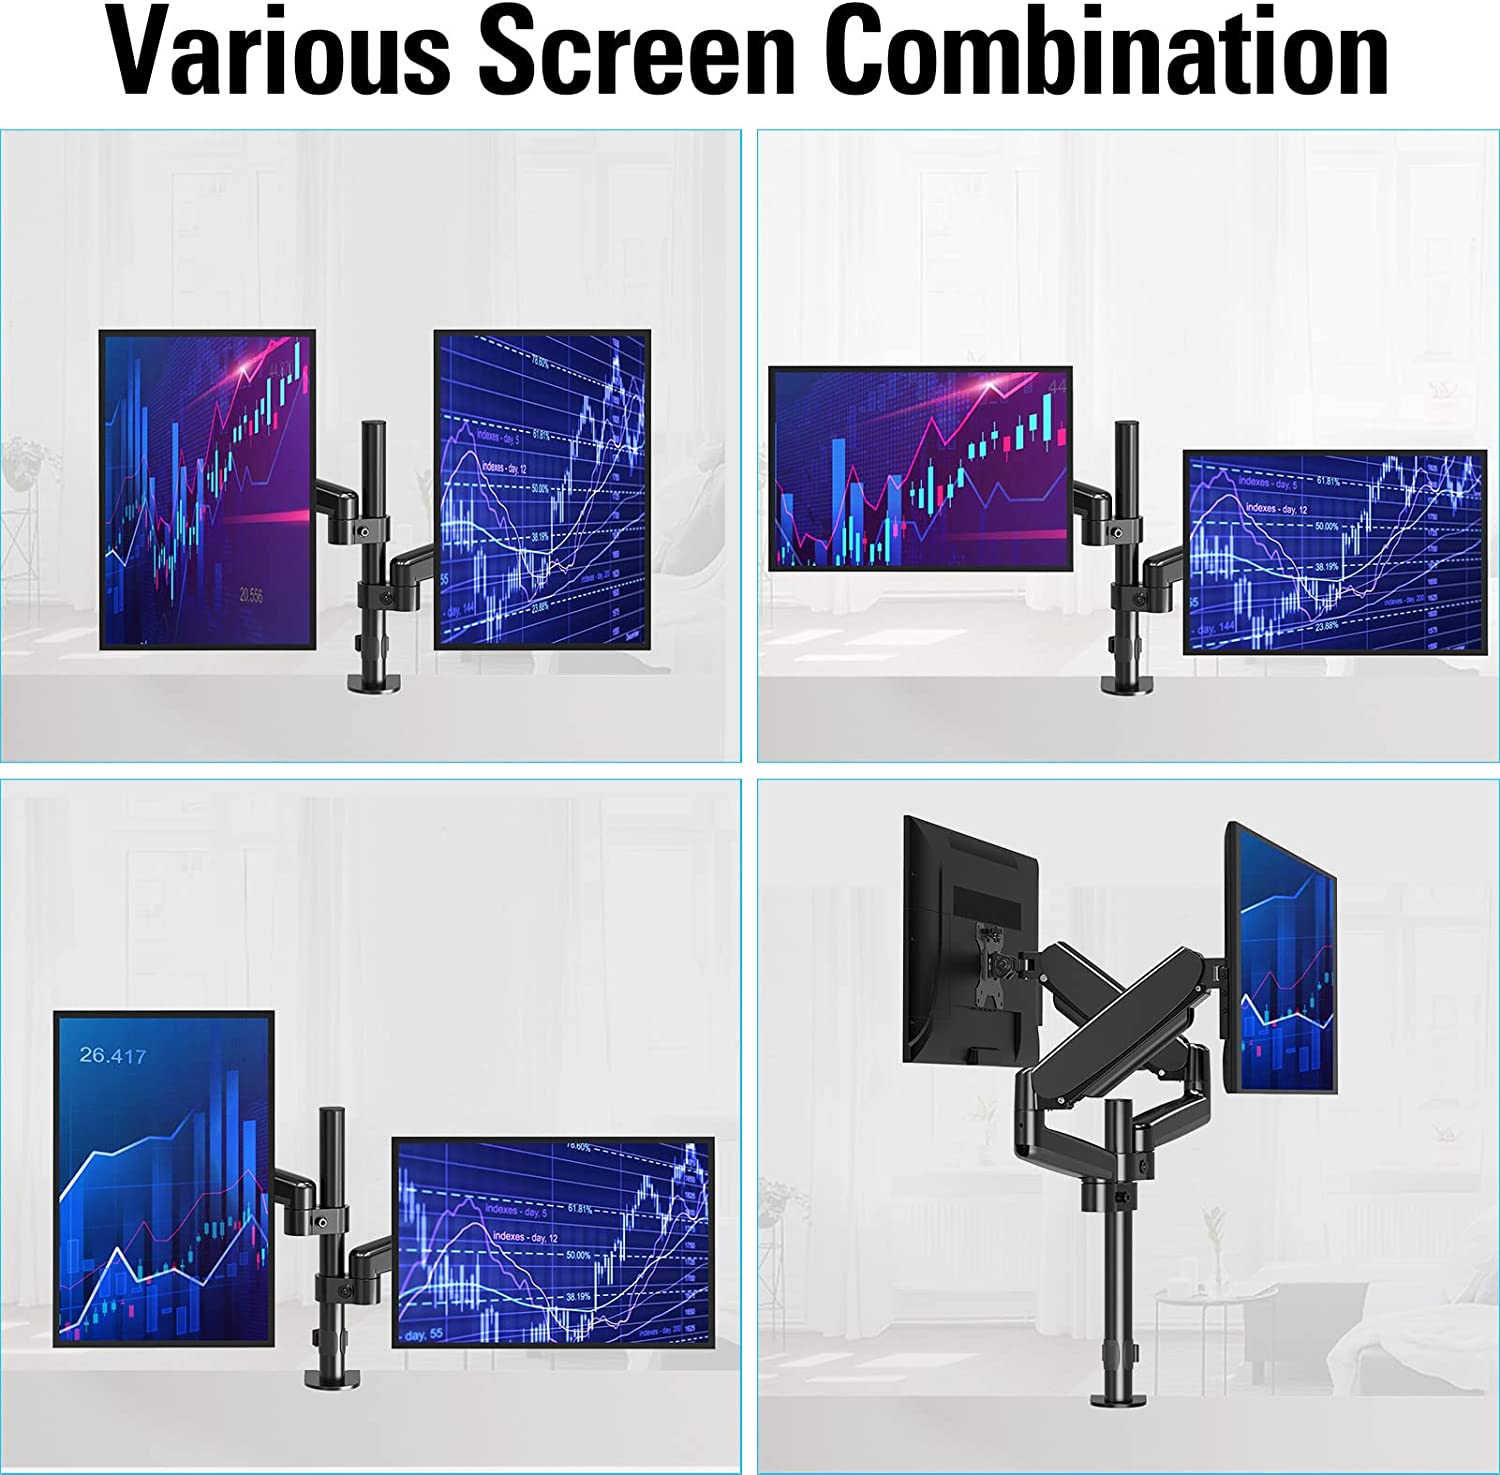 monitor desk stand provides various screen combination